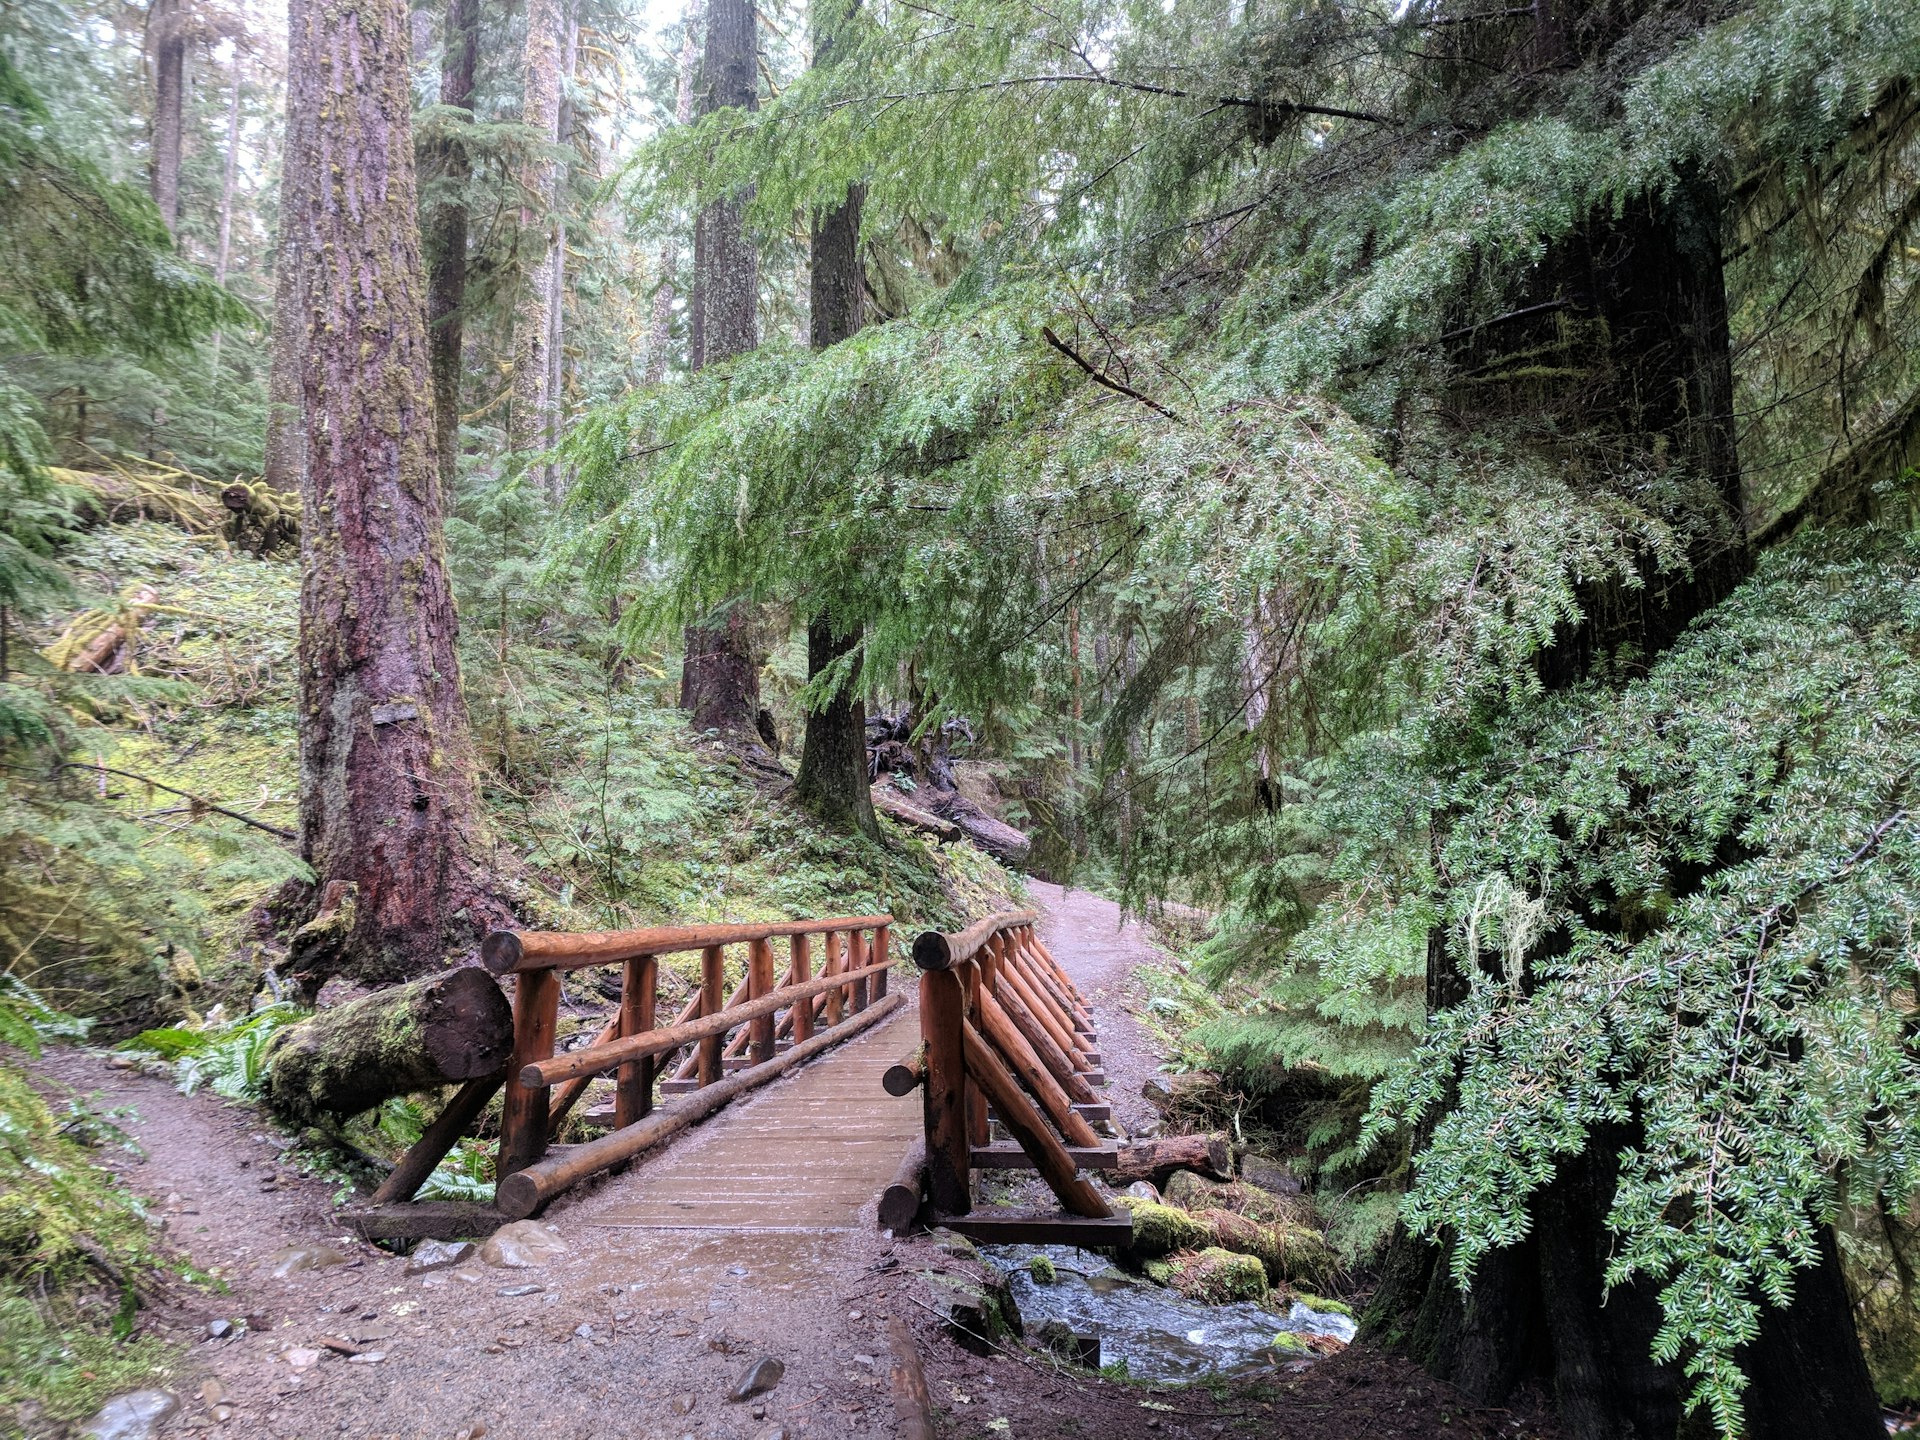 A rustic wooden bridge crosses a stream in Mount Hood National Forest surrounded by evergreen trees covered in moss